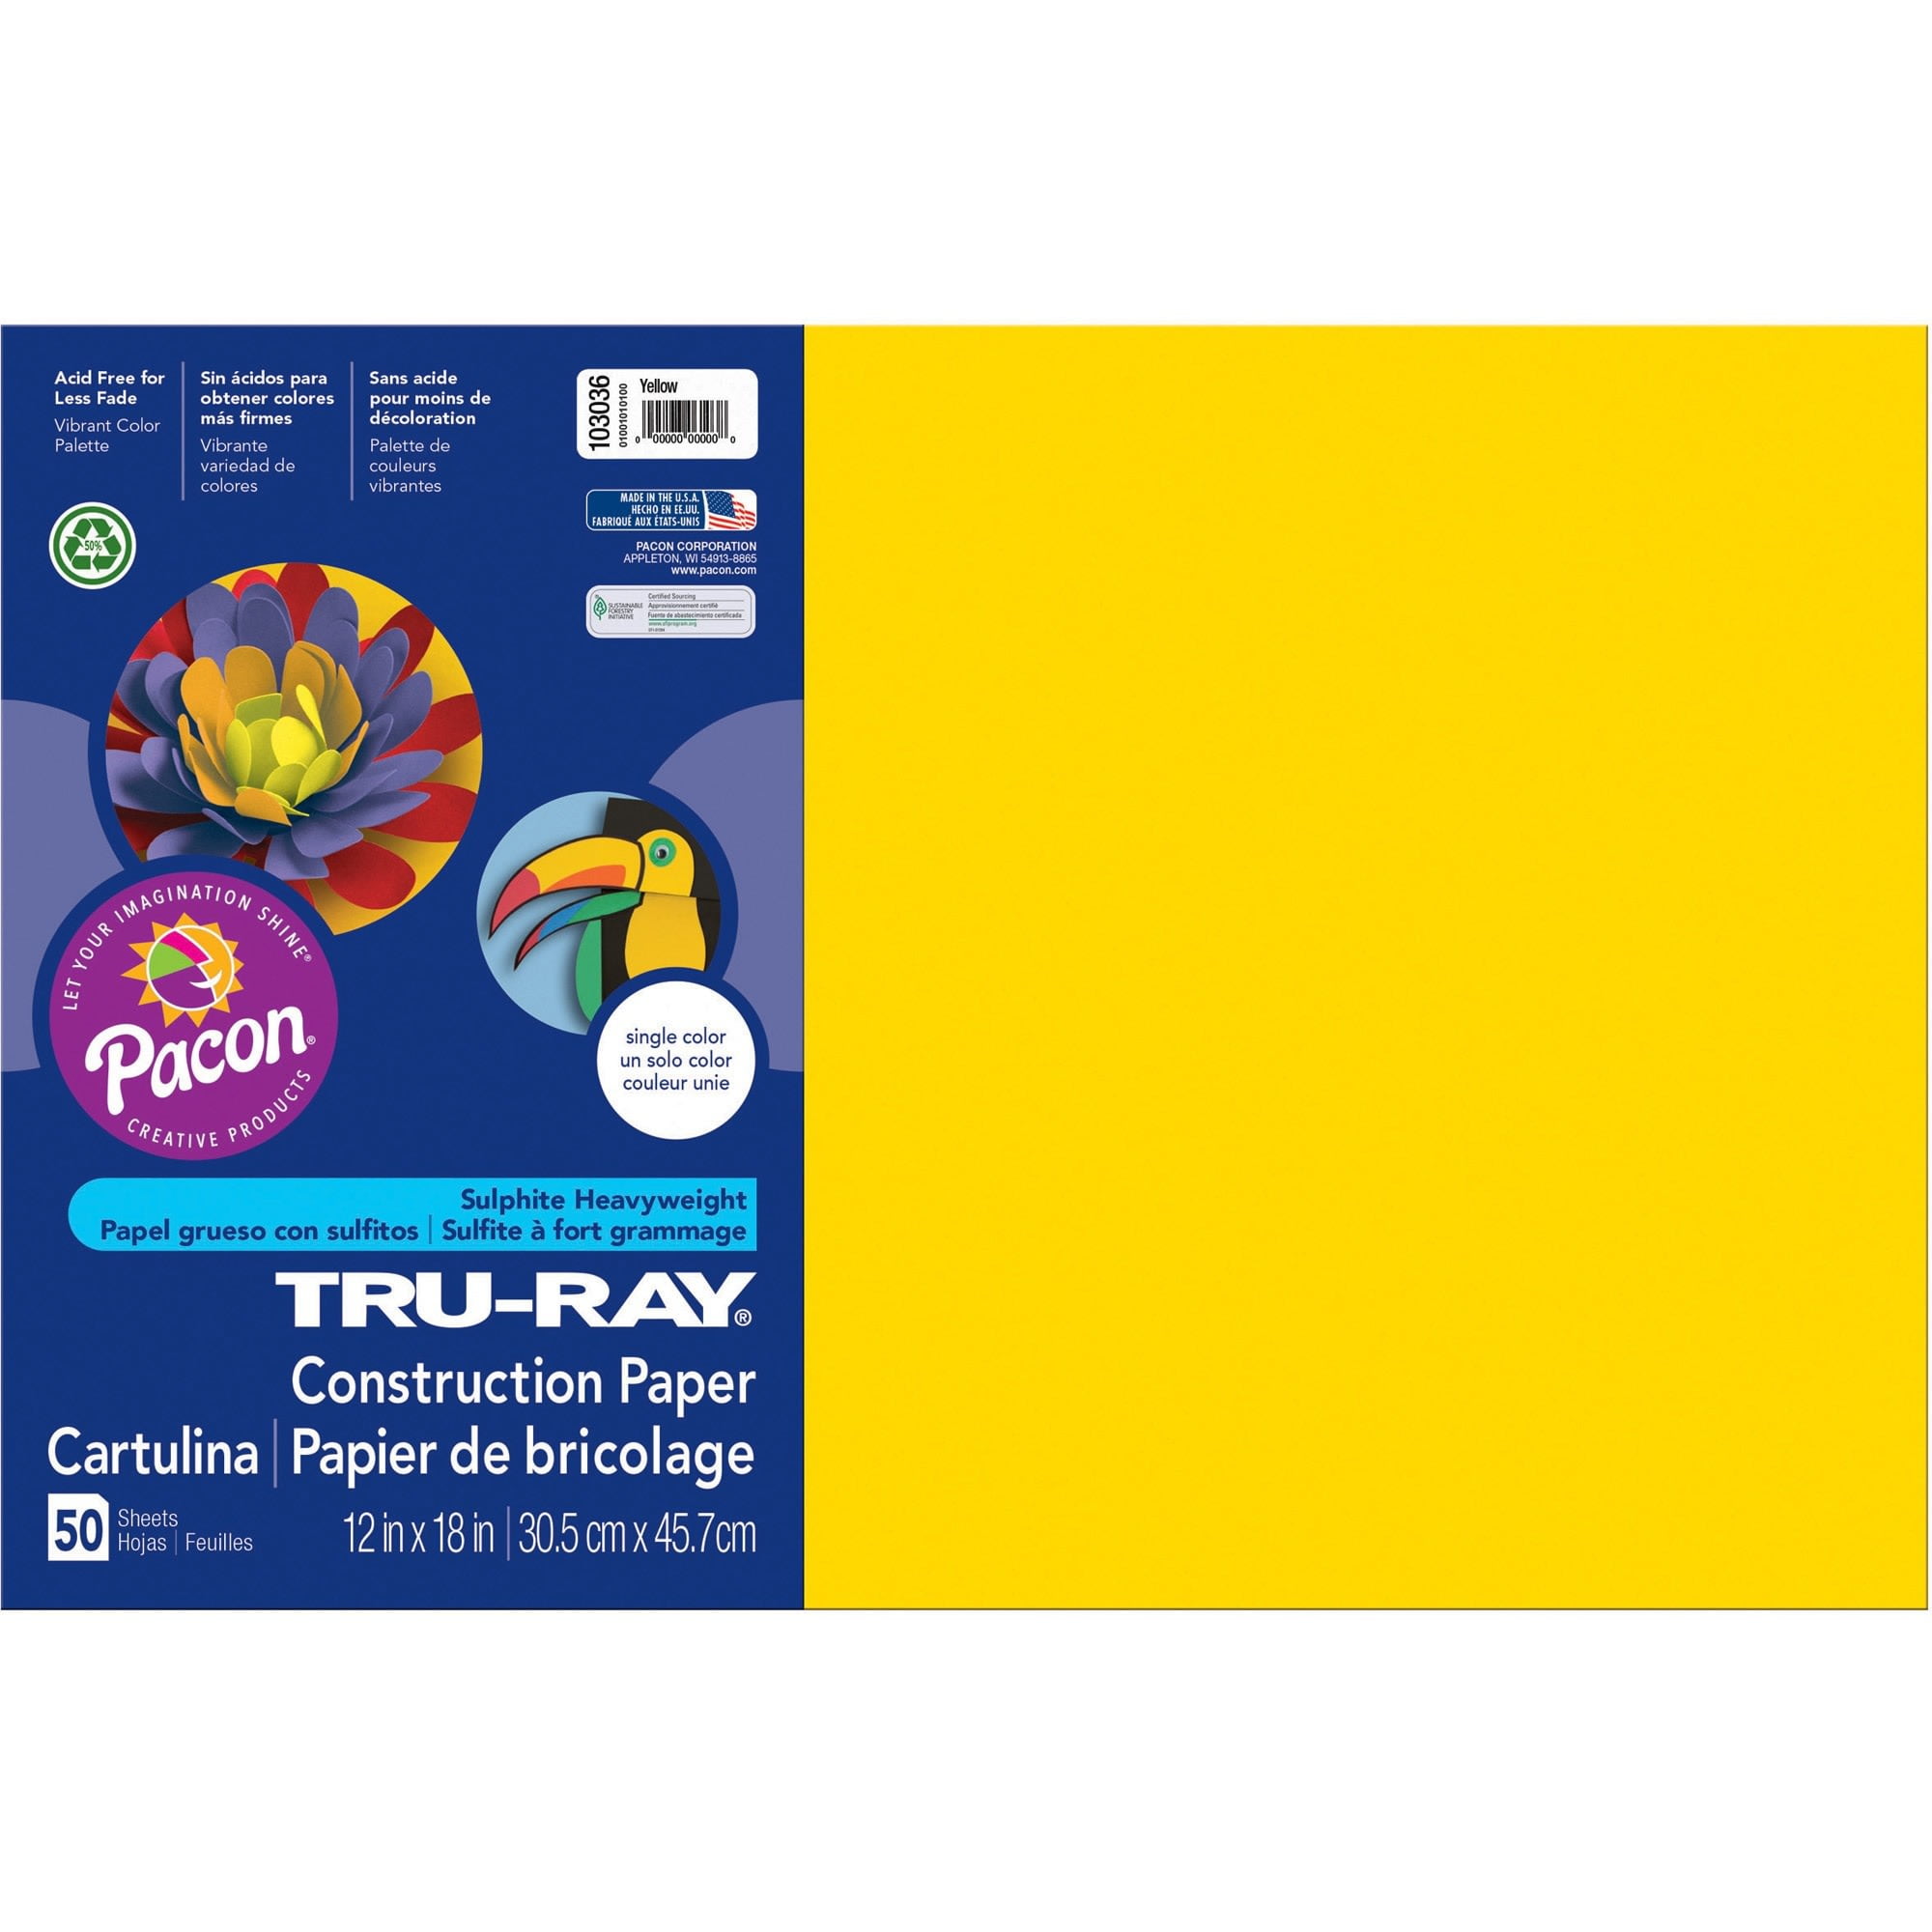 Pacon Tru-Ray Construction Paper - 12 x 18, Smart Stack, 120 Sheets 